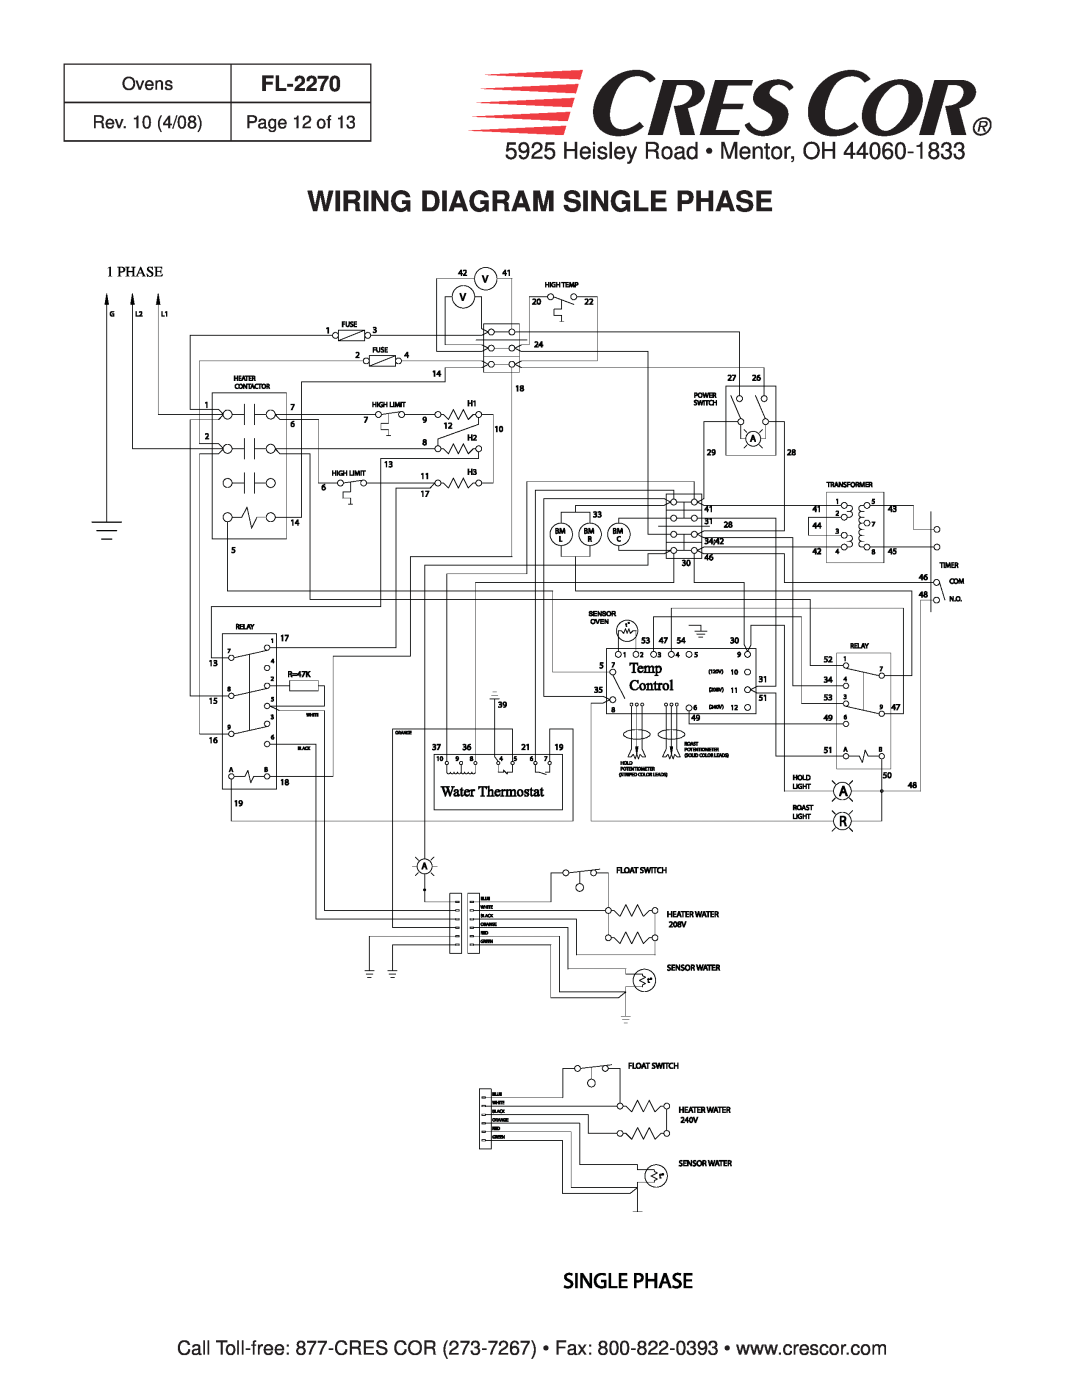 Cres Cor CO151XWUA5B manual Wiring Diagram Single Phase, Heisley Road Mentor, OH, FL-2270, Temp, Water Thermostat, Control 